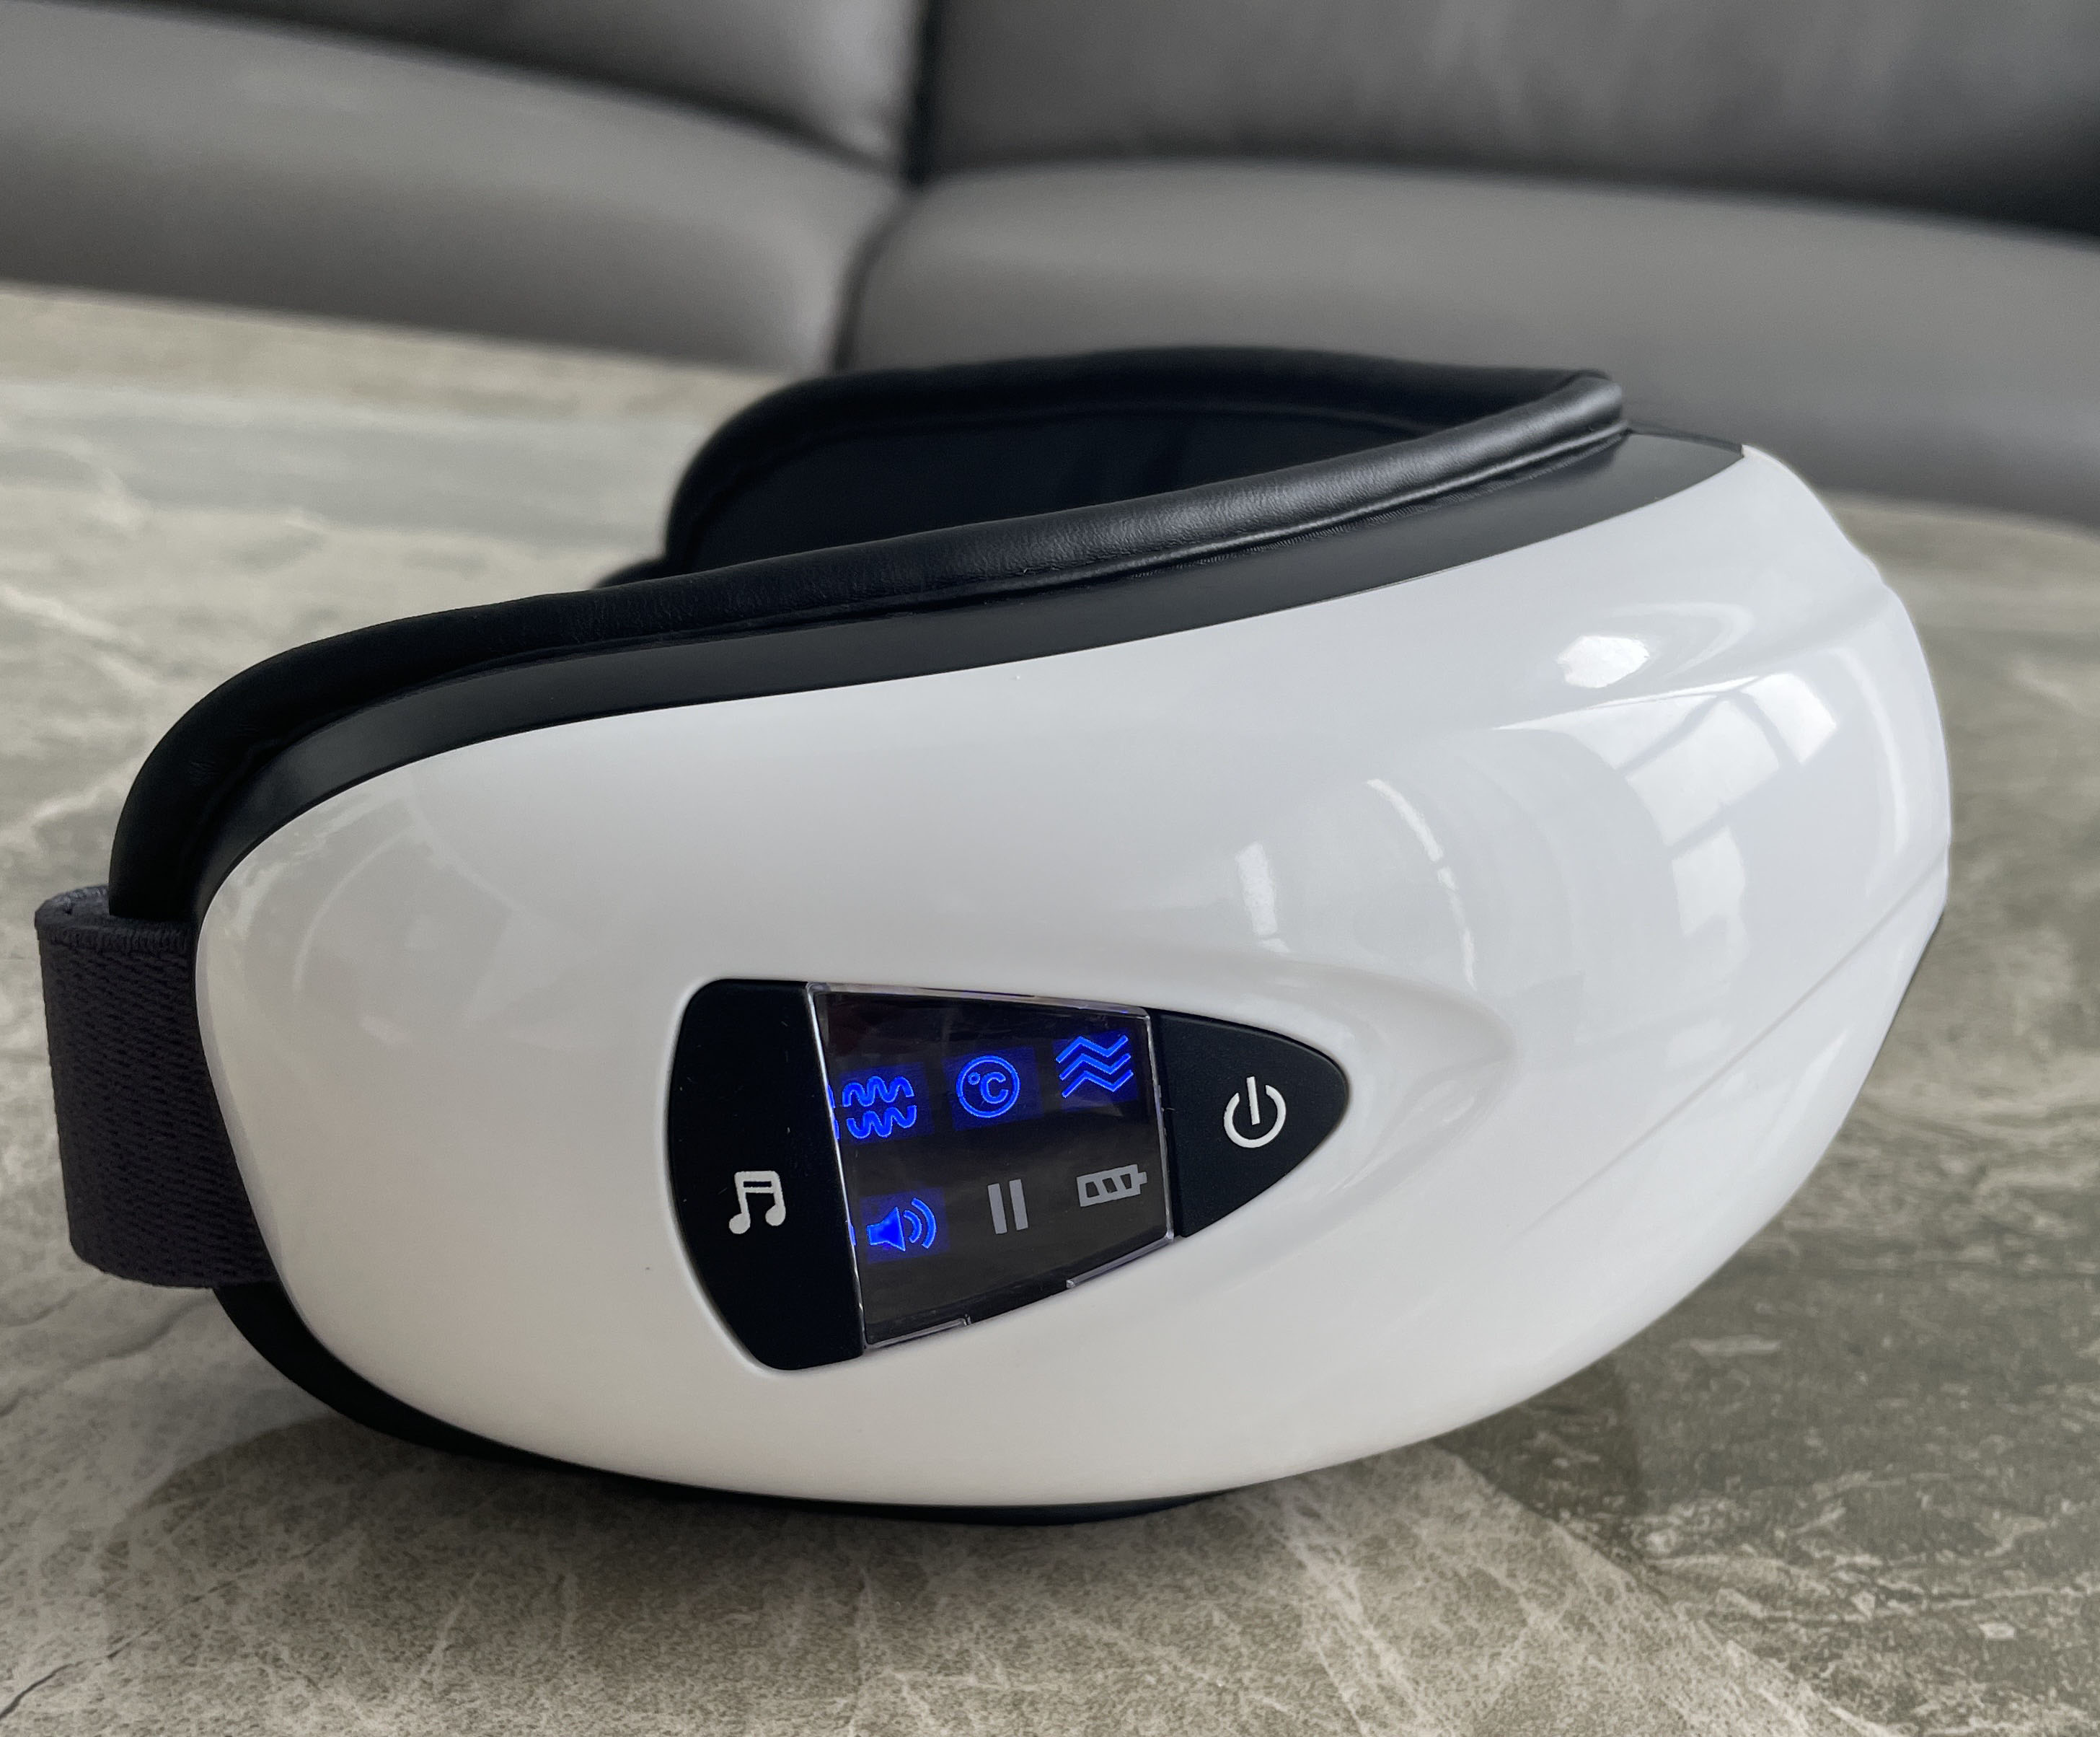 ZMIND E002 High frequency vibrating warm heated eye massager device air pressure wireless vibrative eye massager with music 